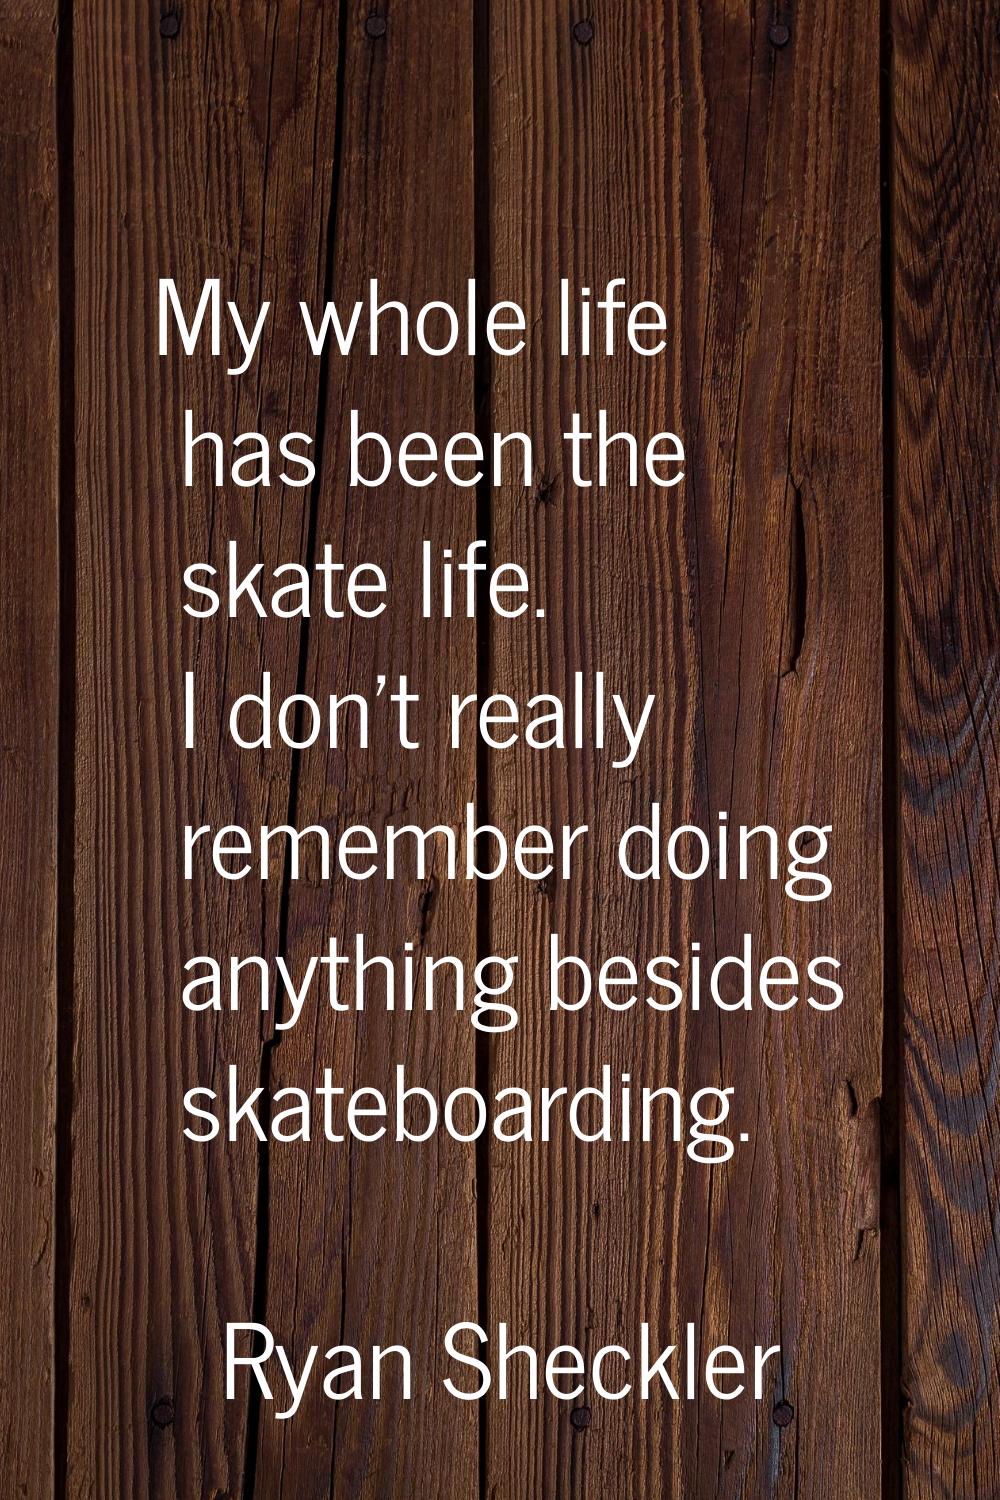 My whole life has been the skate life. I don't really remember doing anything besides skateboarding